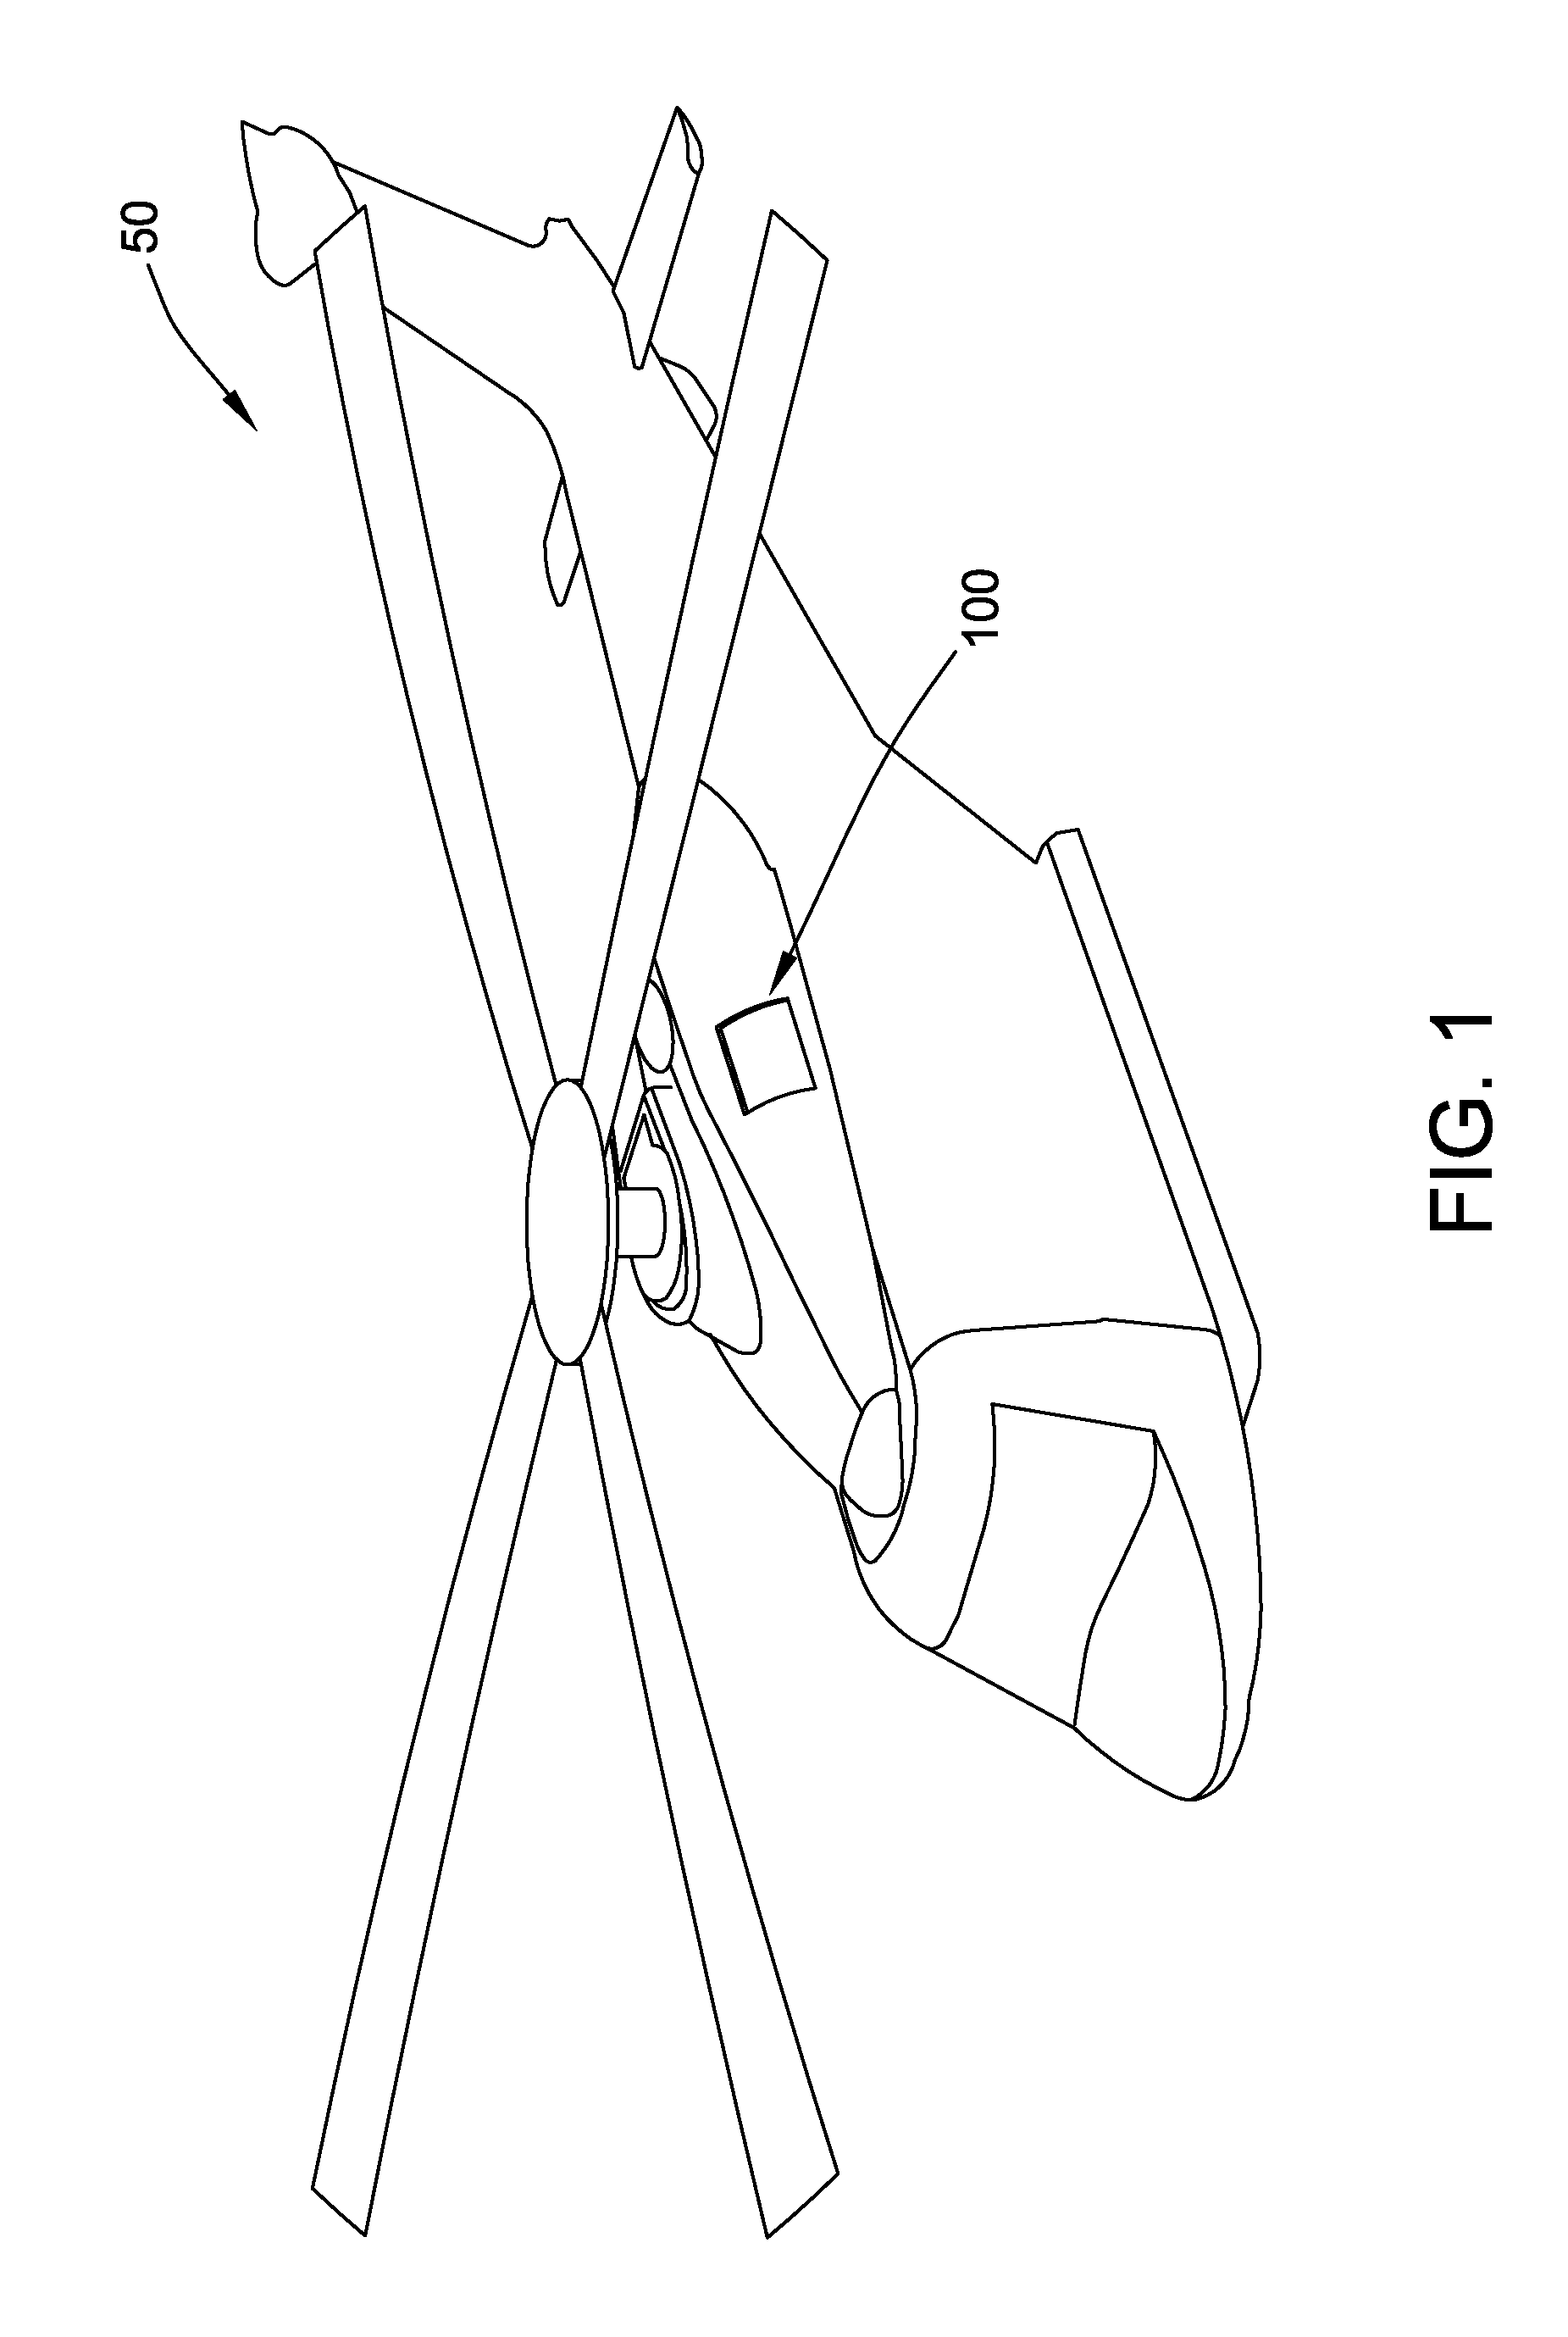 Interchangeable inlet protection systems for air intakes of aircraft engines and related method